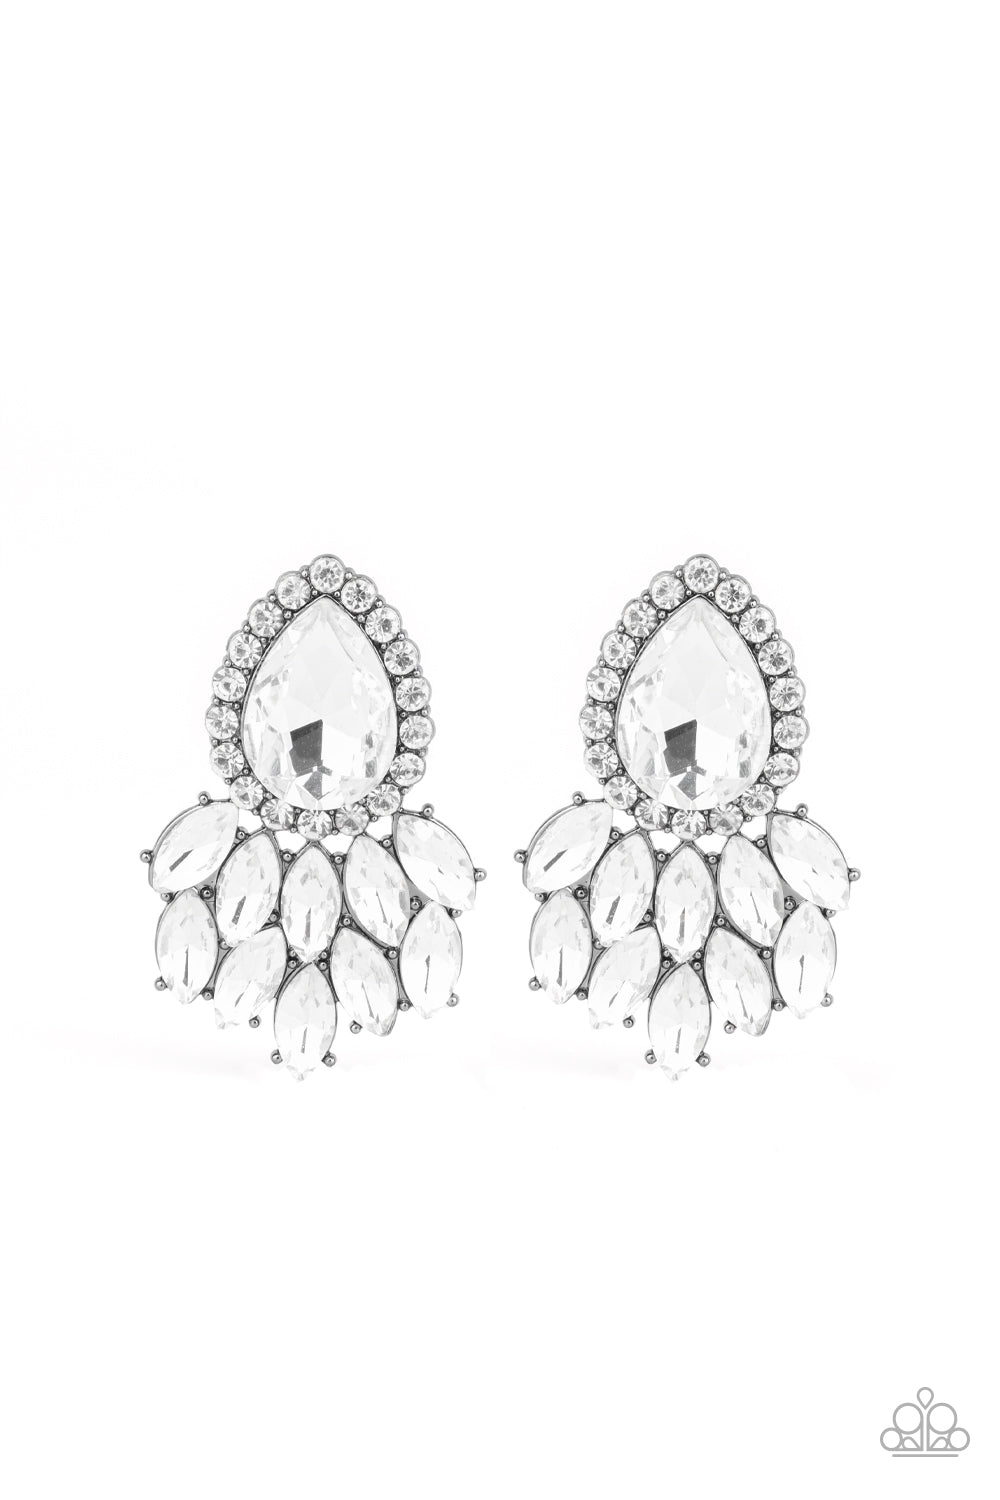 Paparazzi Accessories A Breath of Fresh Heir - Black Earrings glassy white marquise style rhinestones cascade from the bottom of a dramatically oversized white teardrop gem, coalescing into a regal frame. Earring attaches to a standard post fitting.